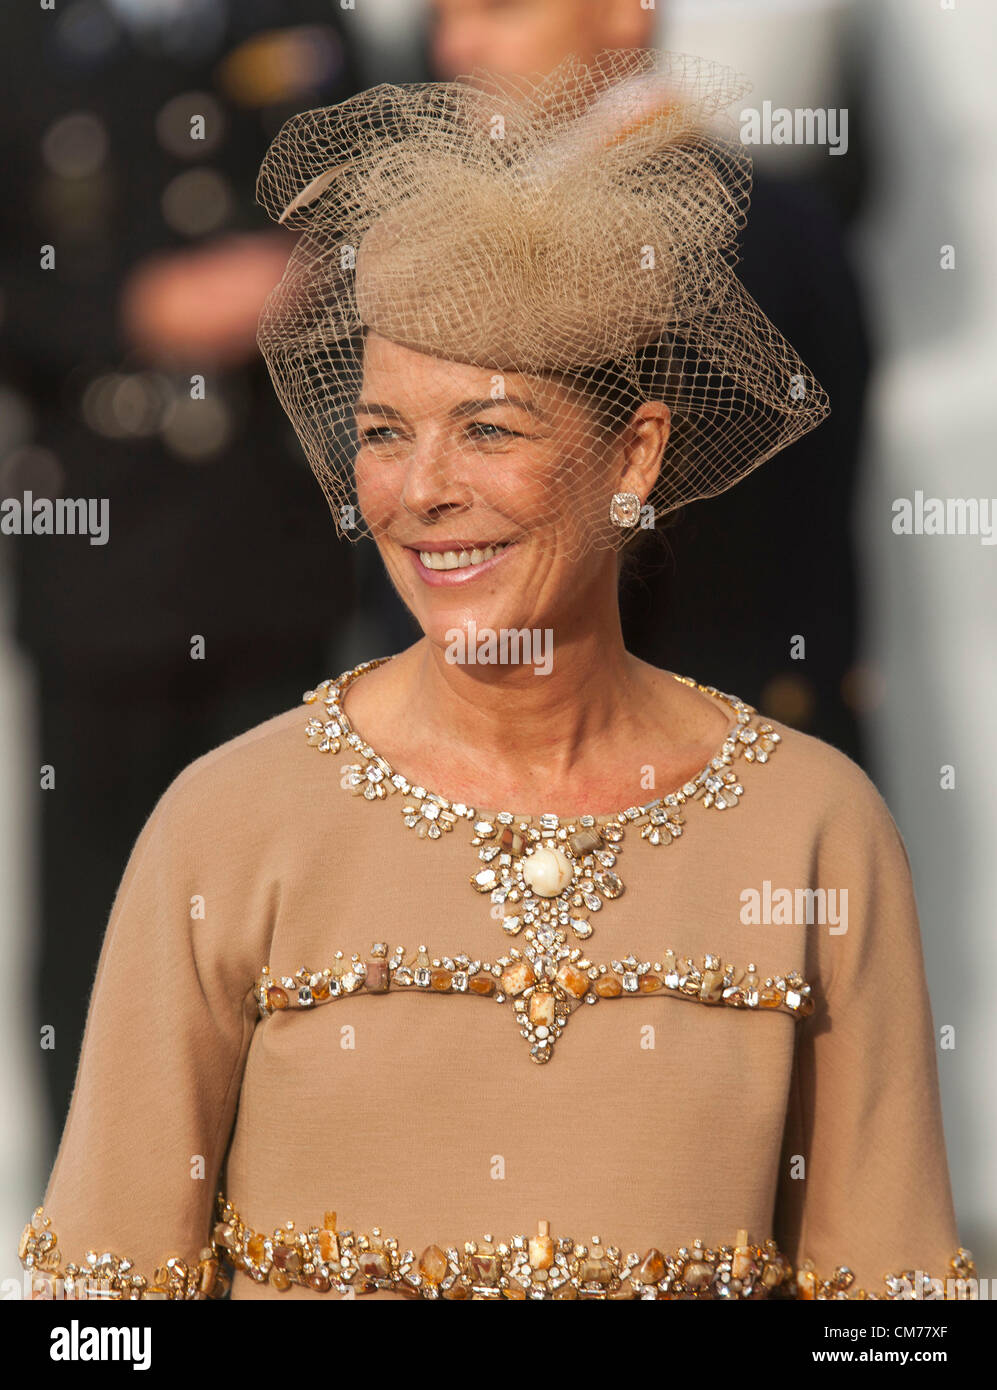 20/10/2012 - Luxembourg - Luxembourg City - Wedding of the Hereditary Grand Duke Guillaume and Countess Stéphanie de Lannoy at the Luxembourg Cathedral. Arrivals.Princess Caroline of Monaco. Stock Photo